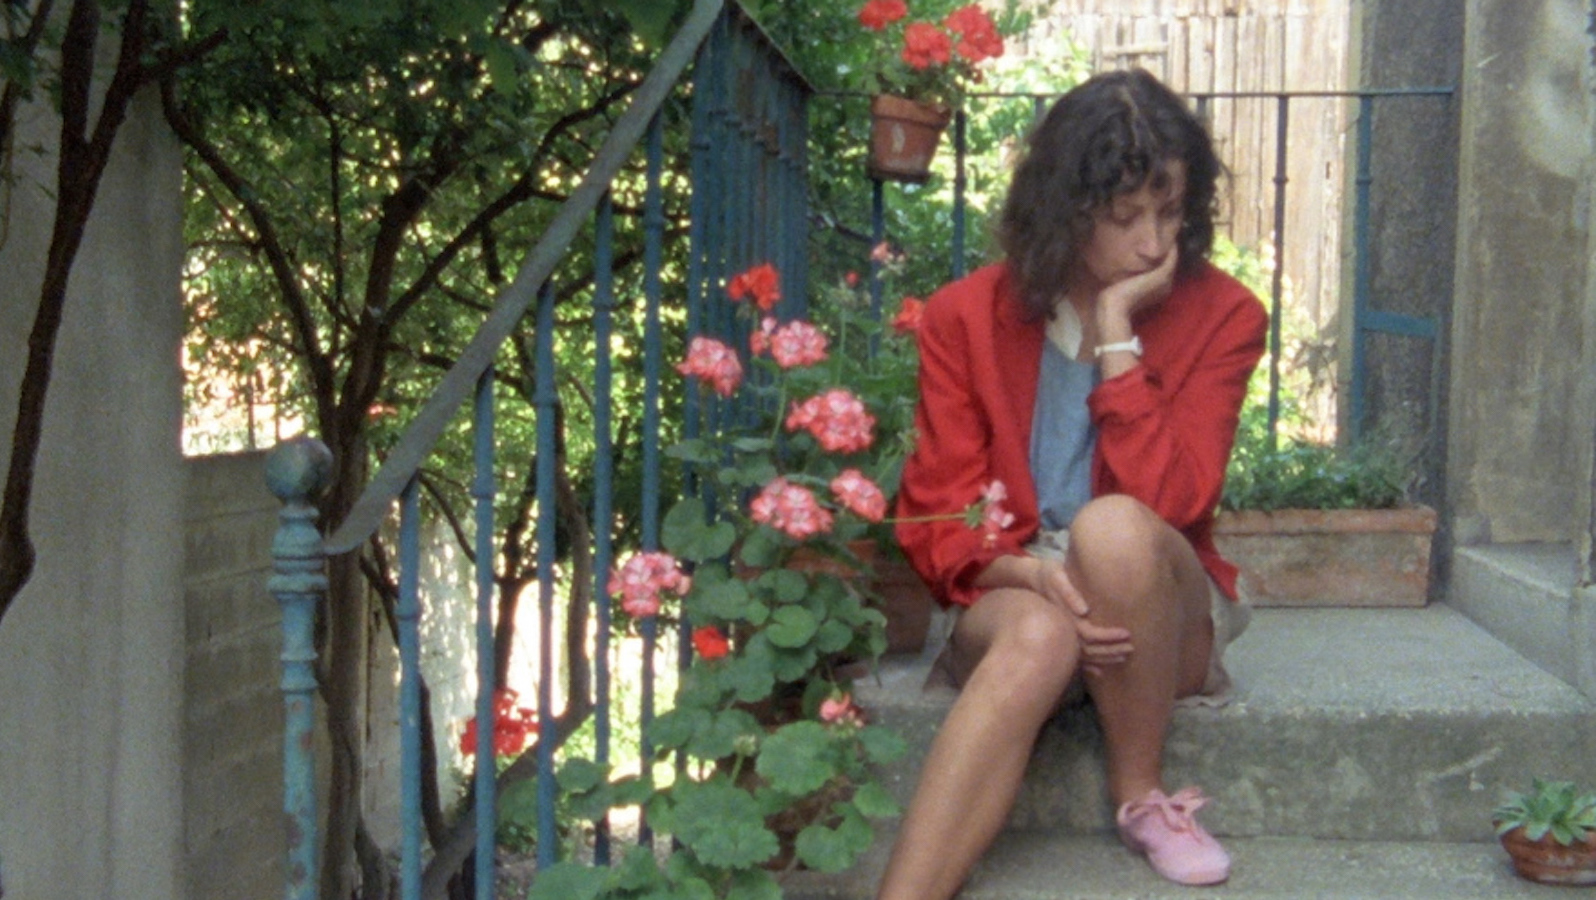 A woman in red jacket sits on outdoor steps next to pink flowers while she looks down, her chin resting in her hand